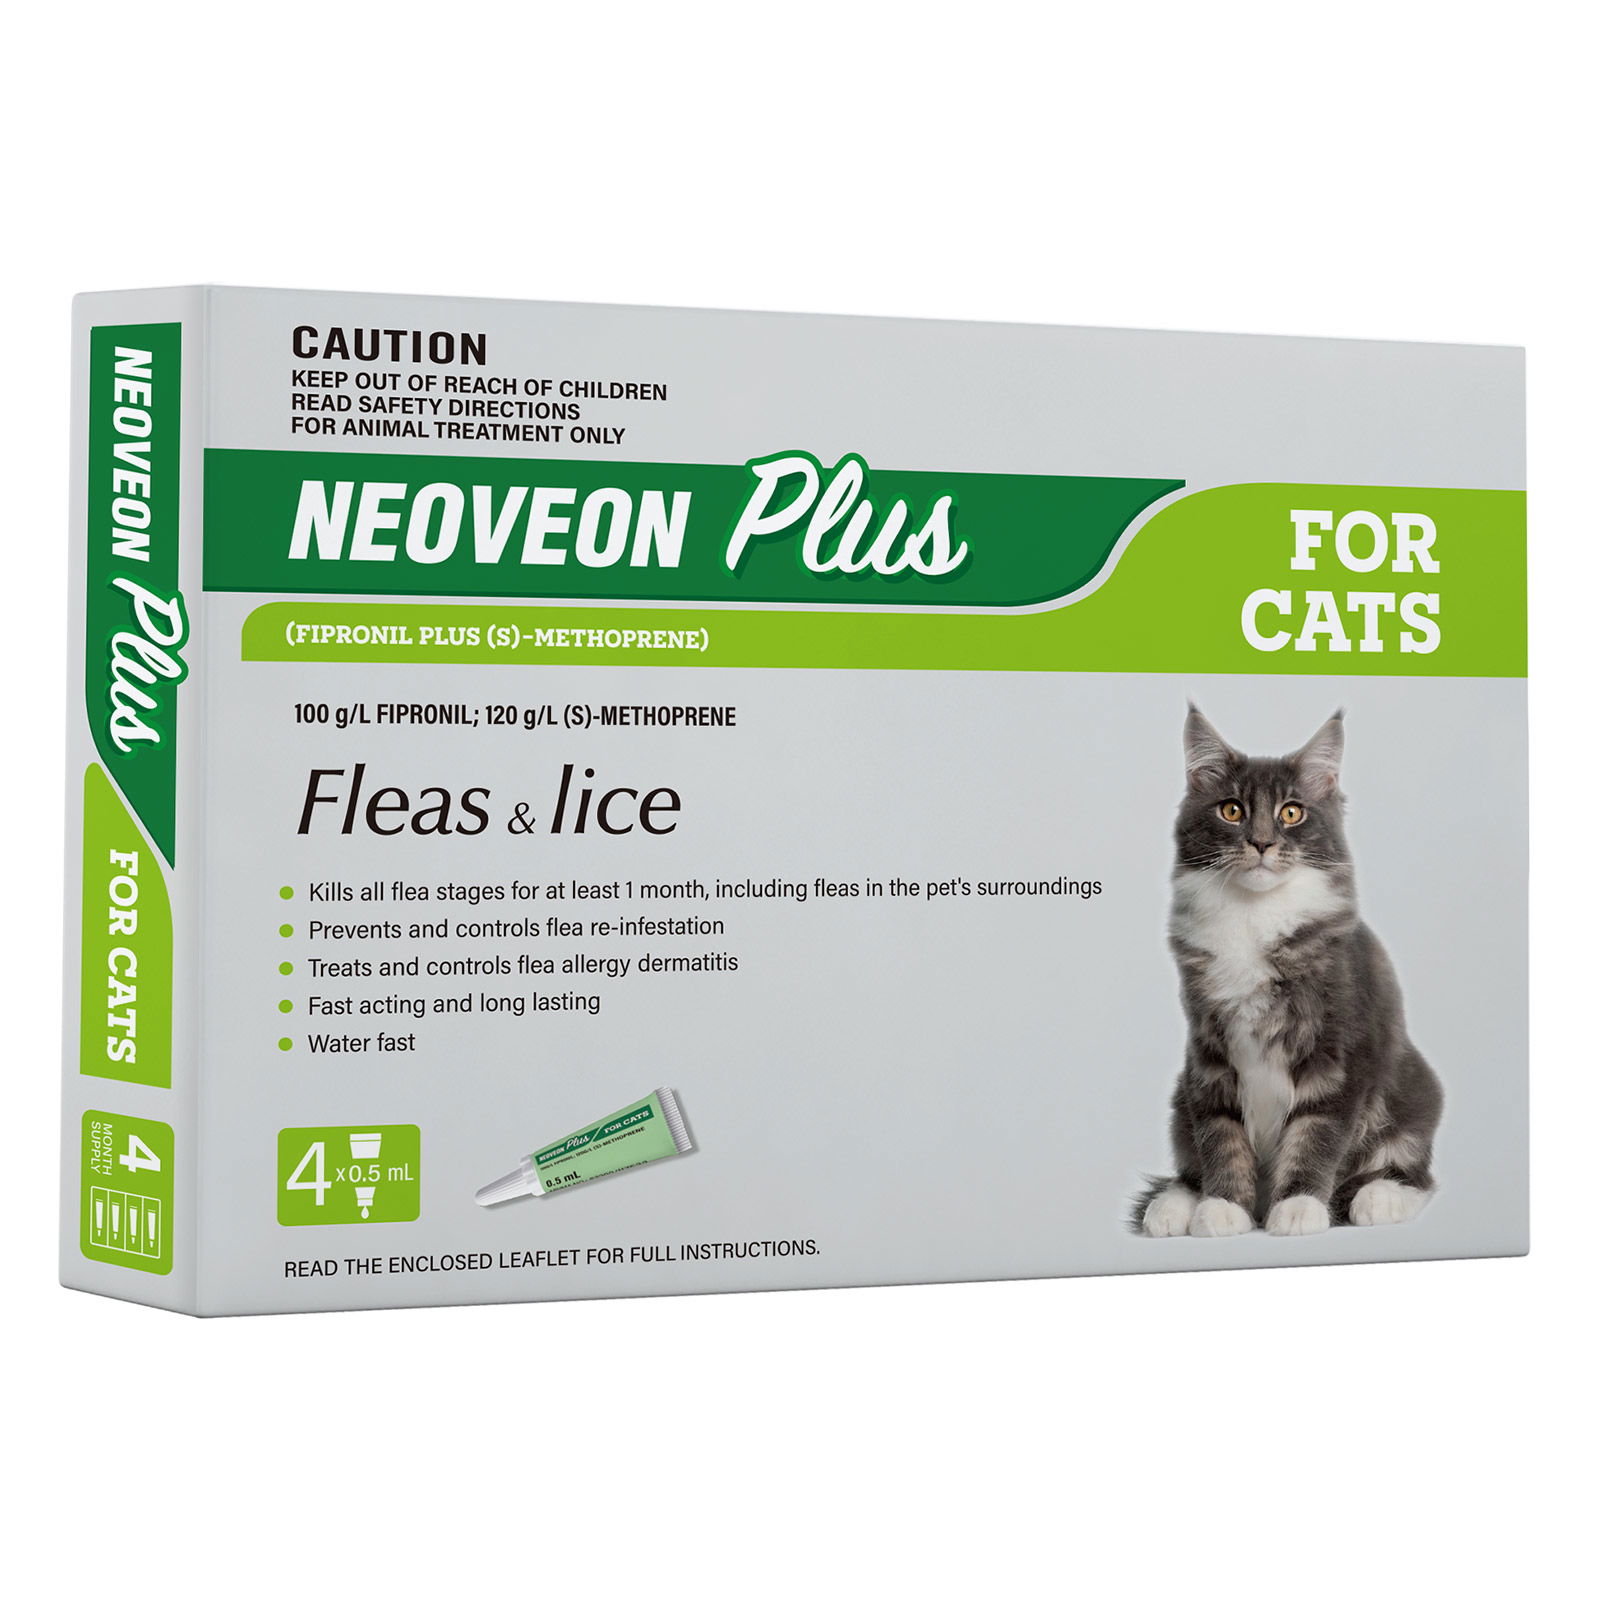 Neoveon Plus Fleas And Lice For Cats 12 Pack (Exp: 04/2025)